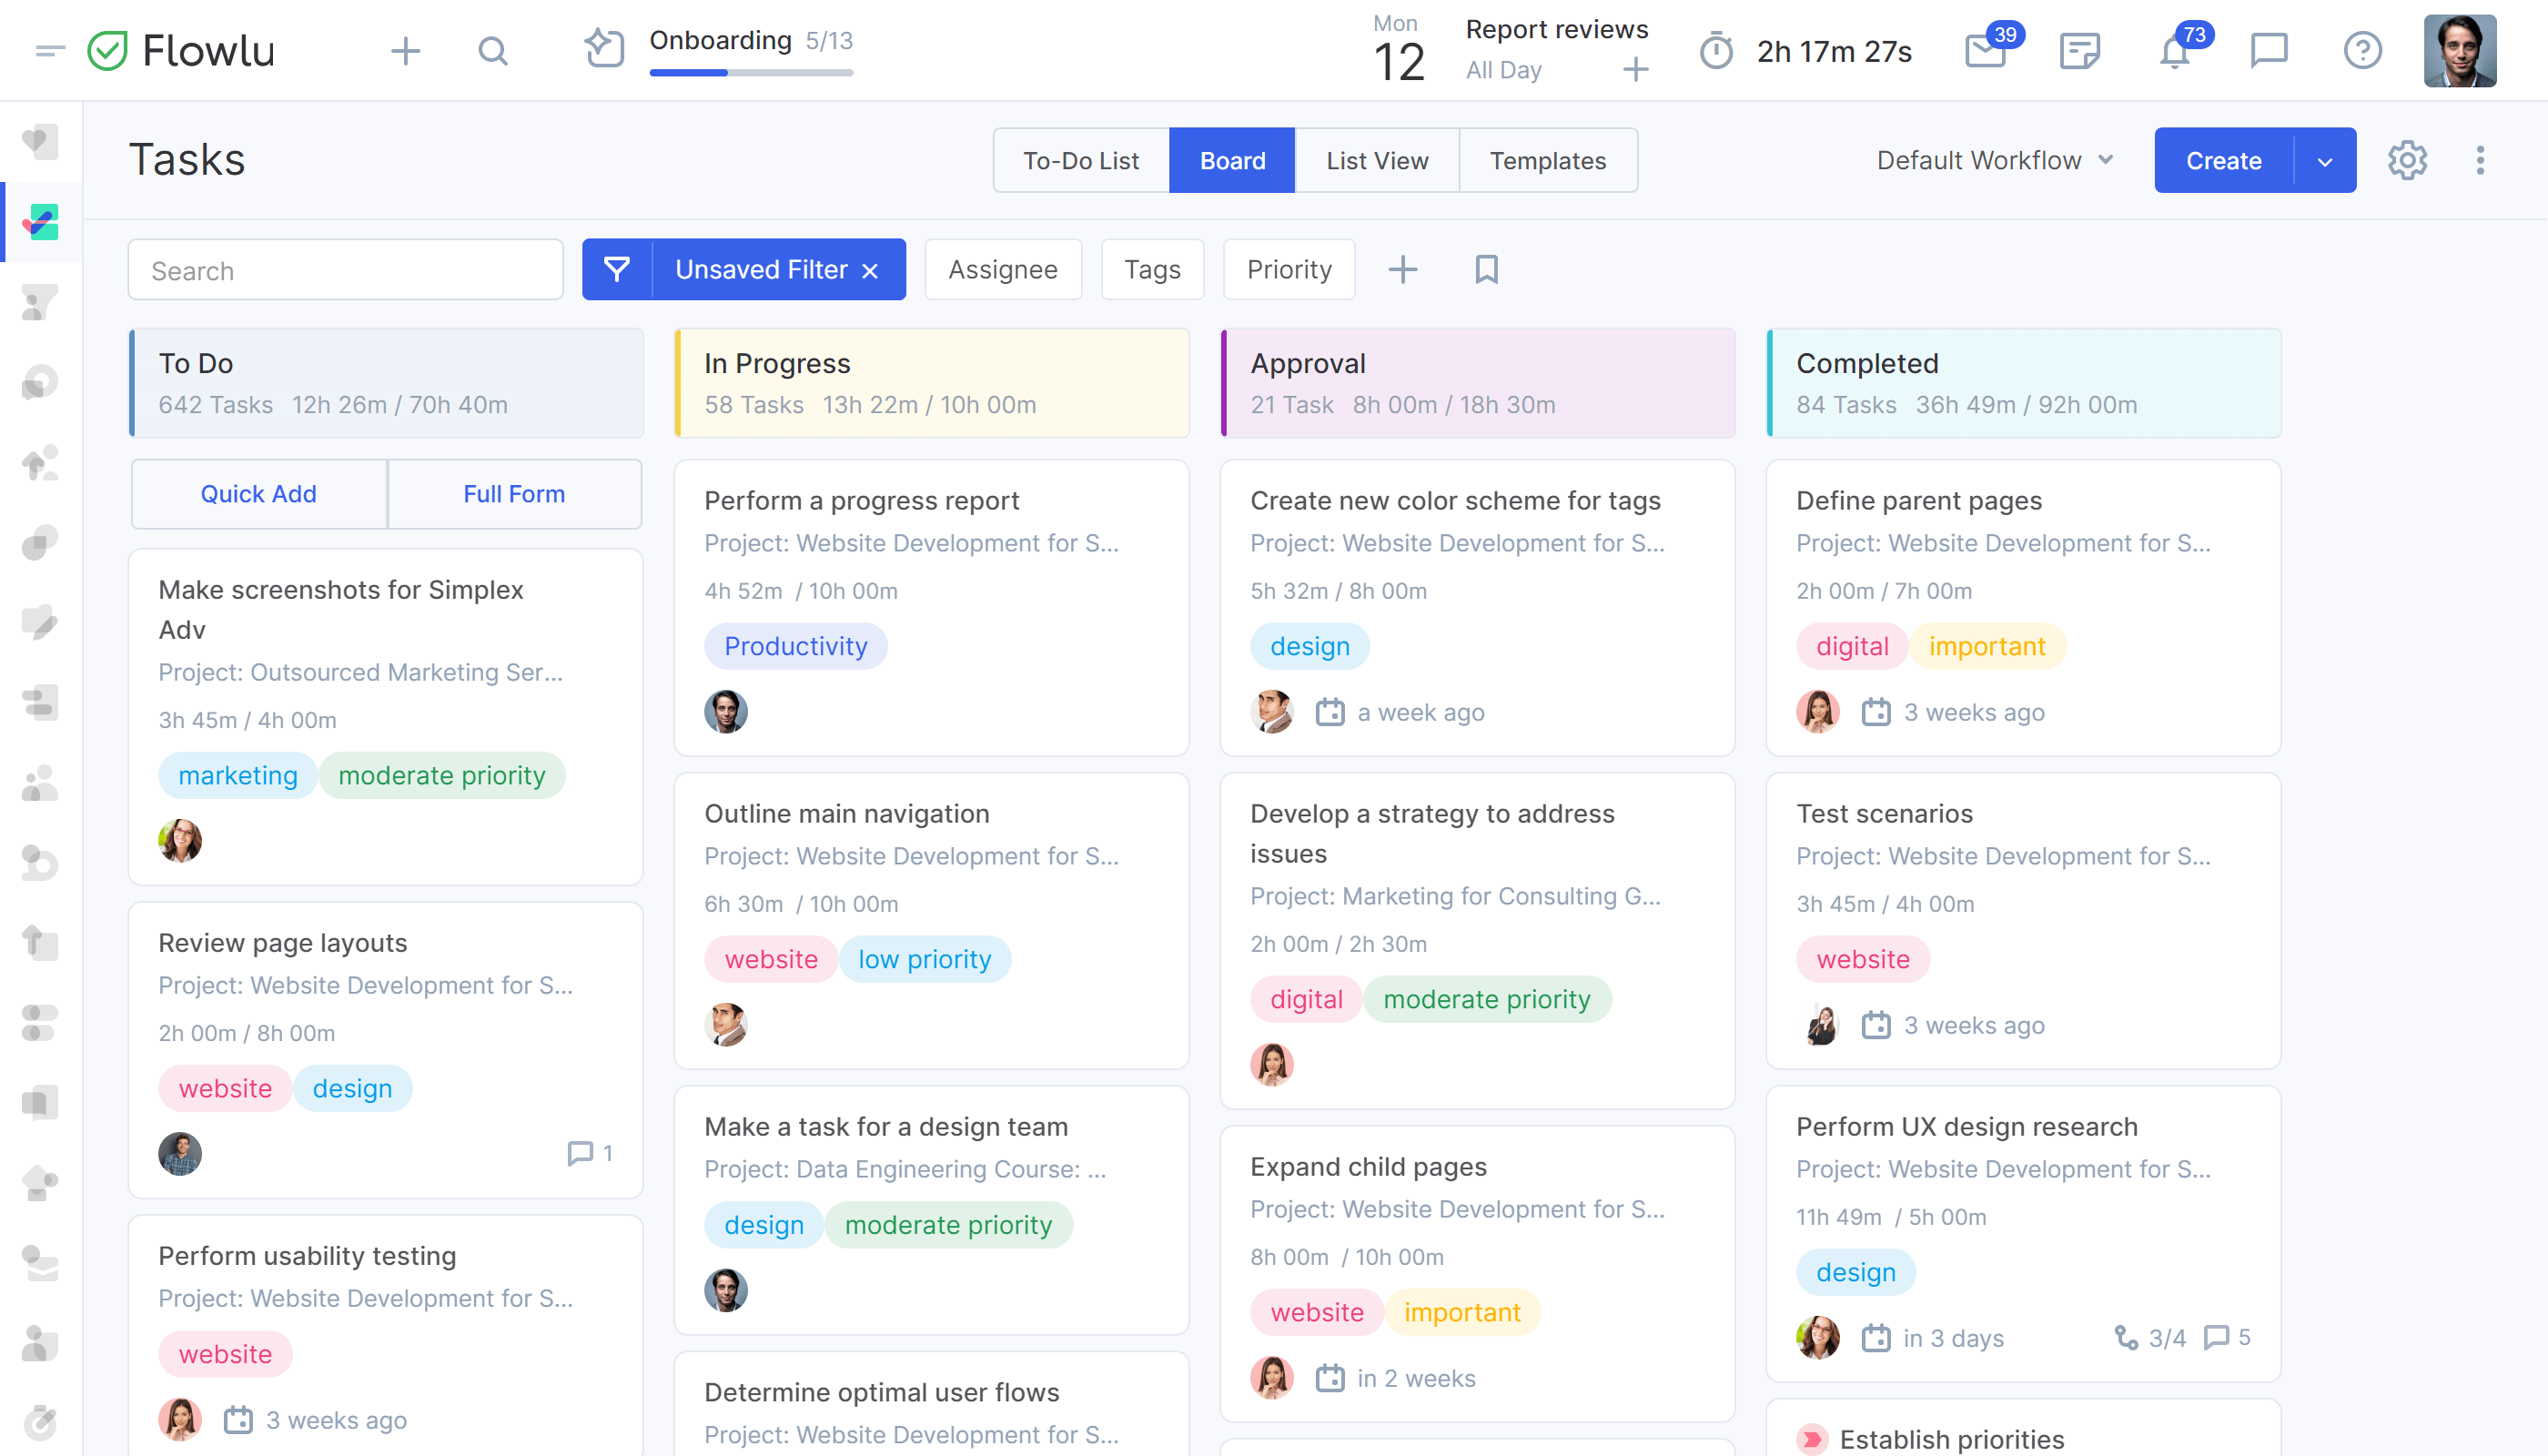 Flowlu - Create and keep track of your marketing projects